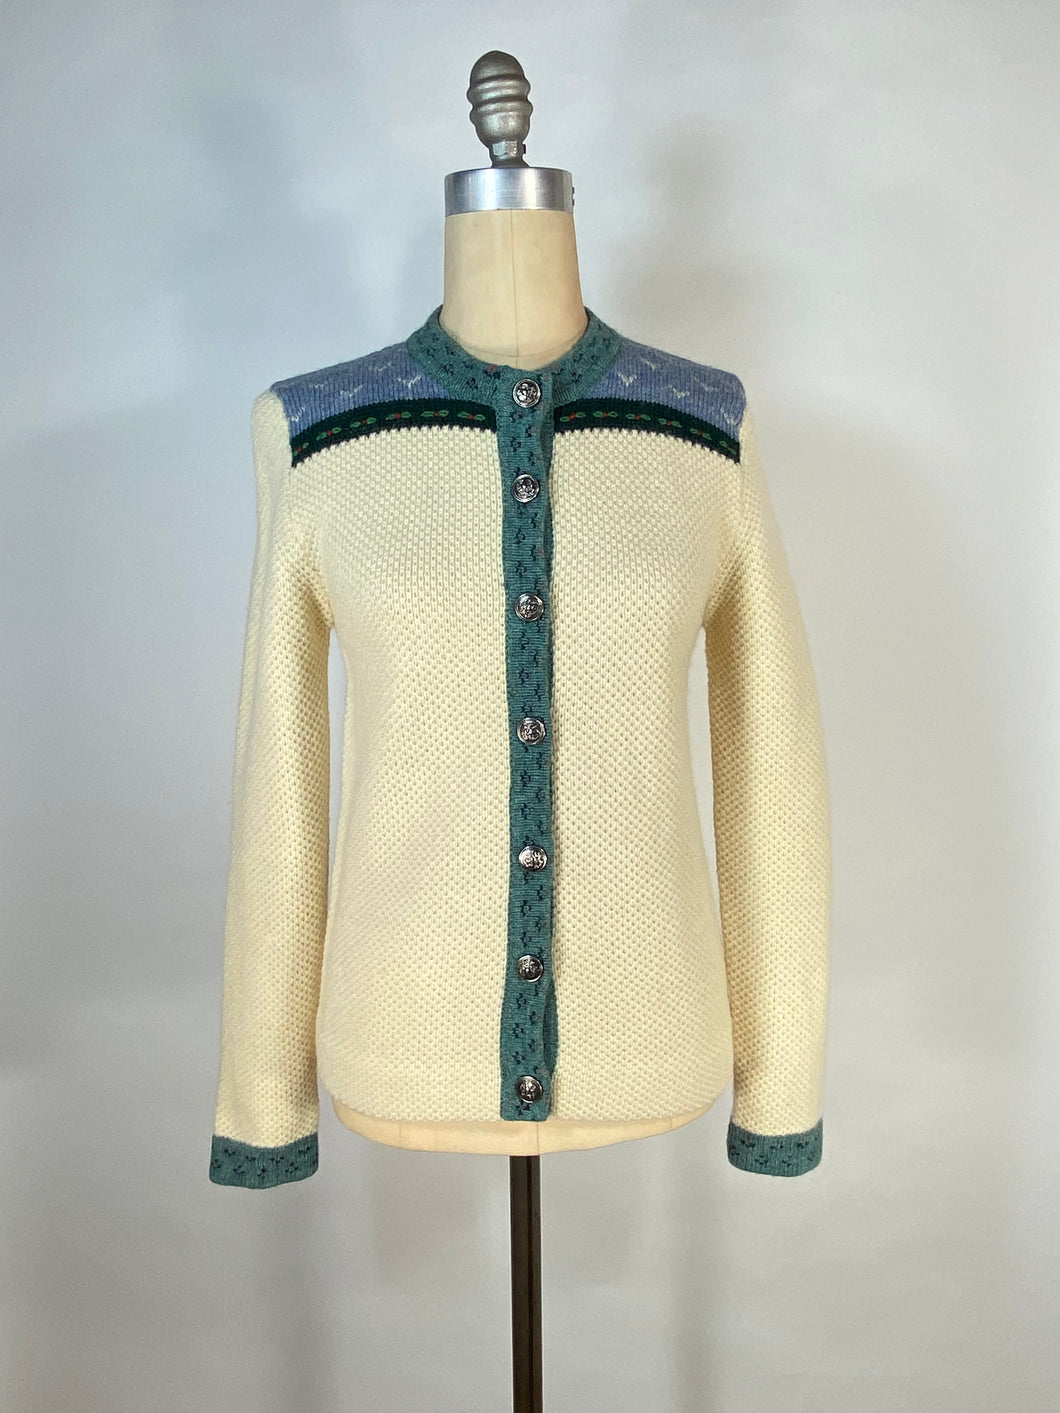 1990's detailed knit wool cardigan sweater by CONCEPTS Susan Bristol size Small